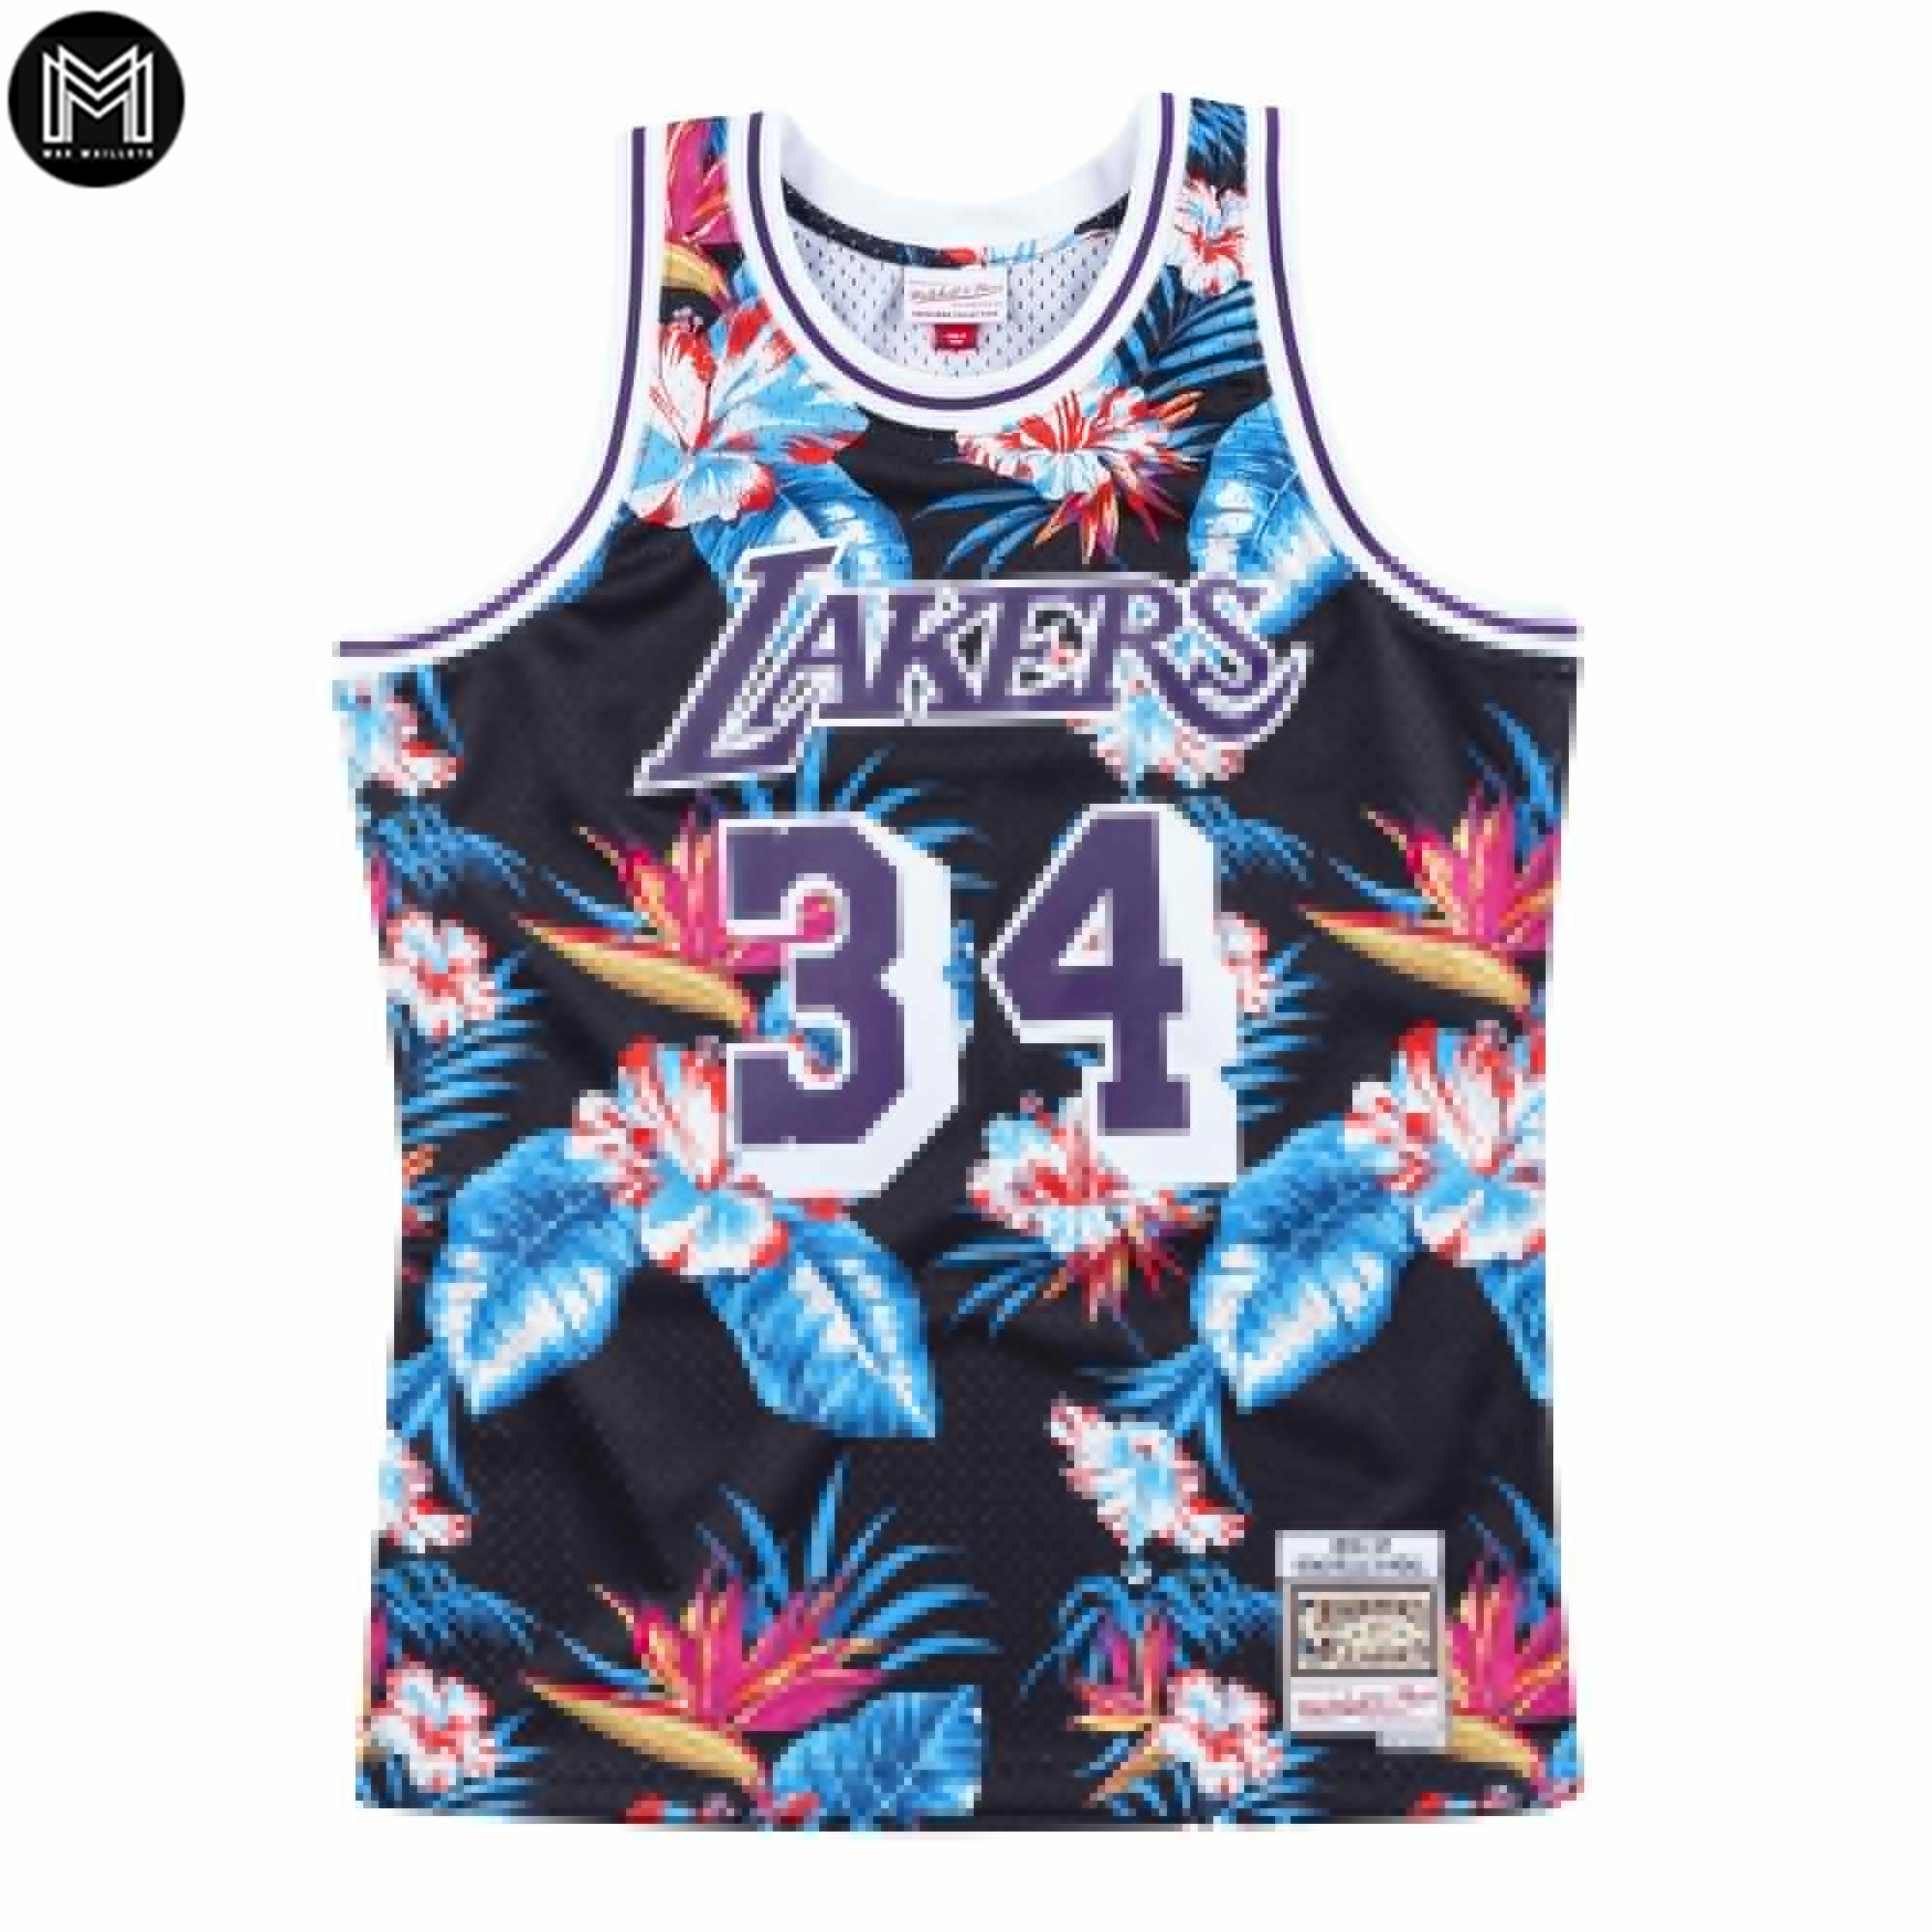 Shaquille Oneal Los Angeles Lakers - Mitchell & Ness Floral Pack